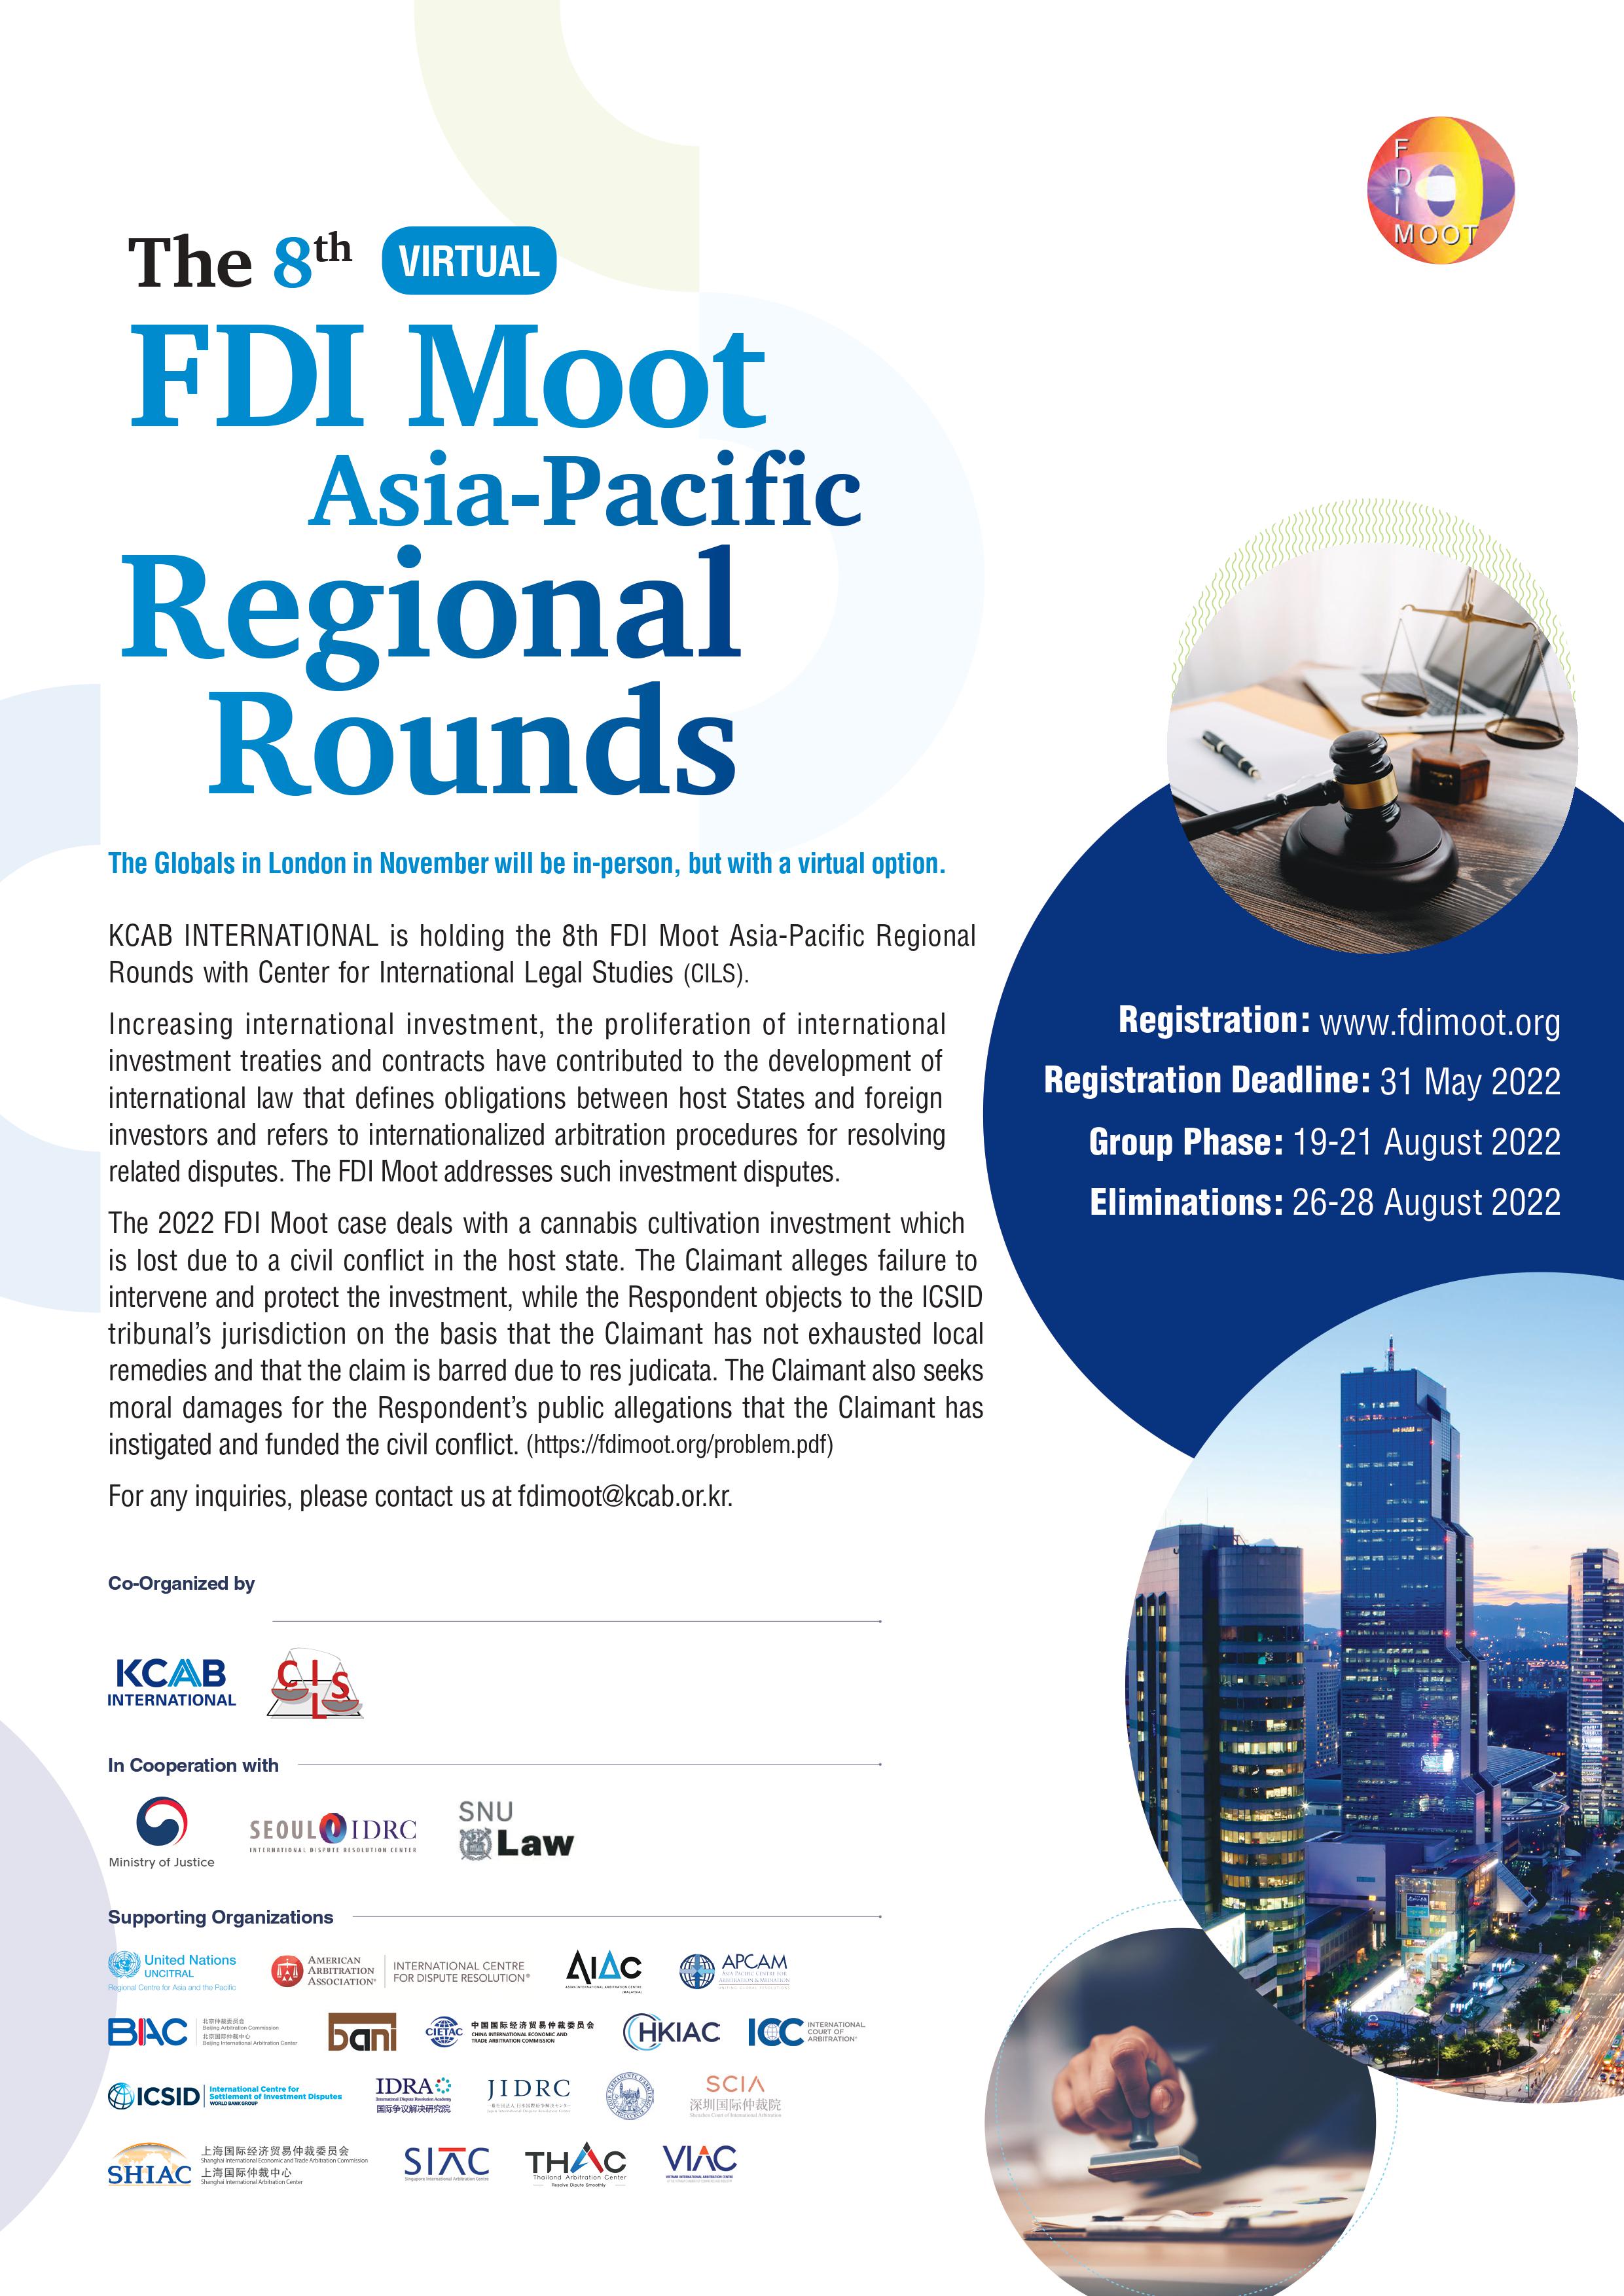 The 8th FDI Moot Asia-Pacific Regional Rounds